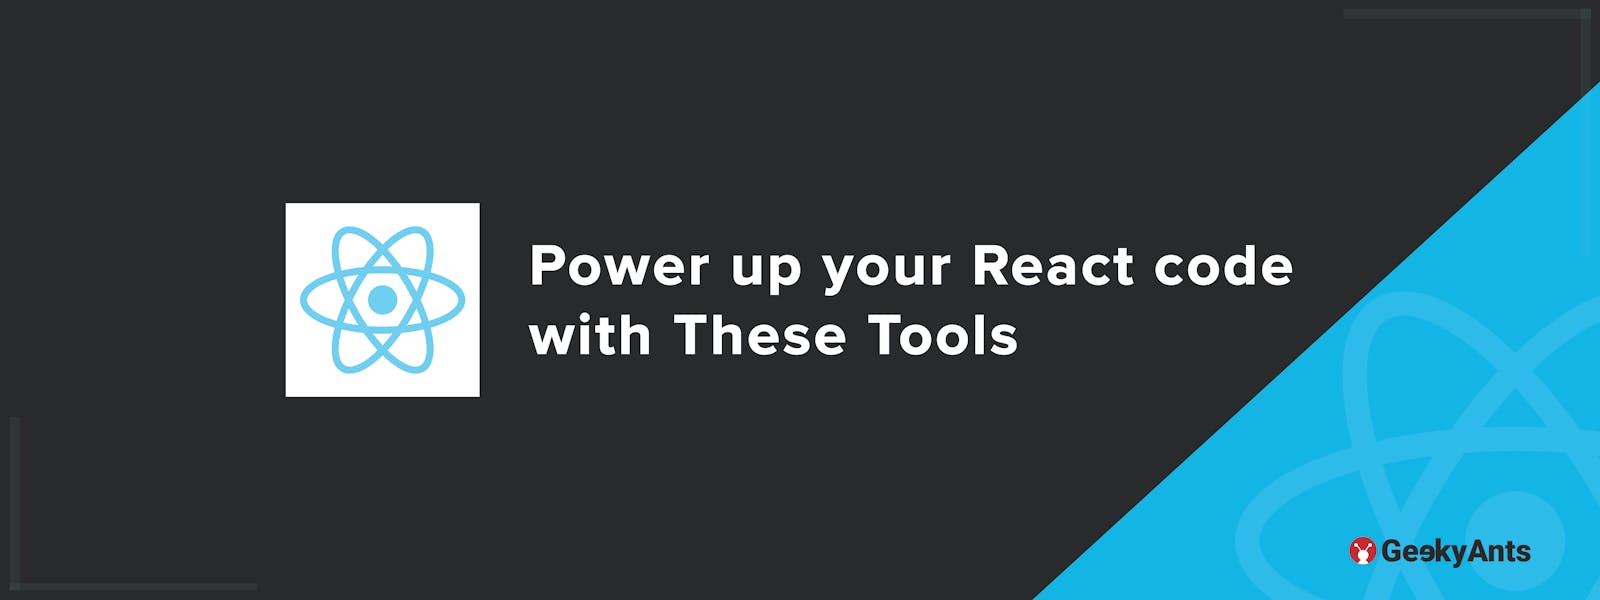 Power Up Your React Code With These Tools